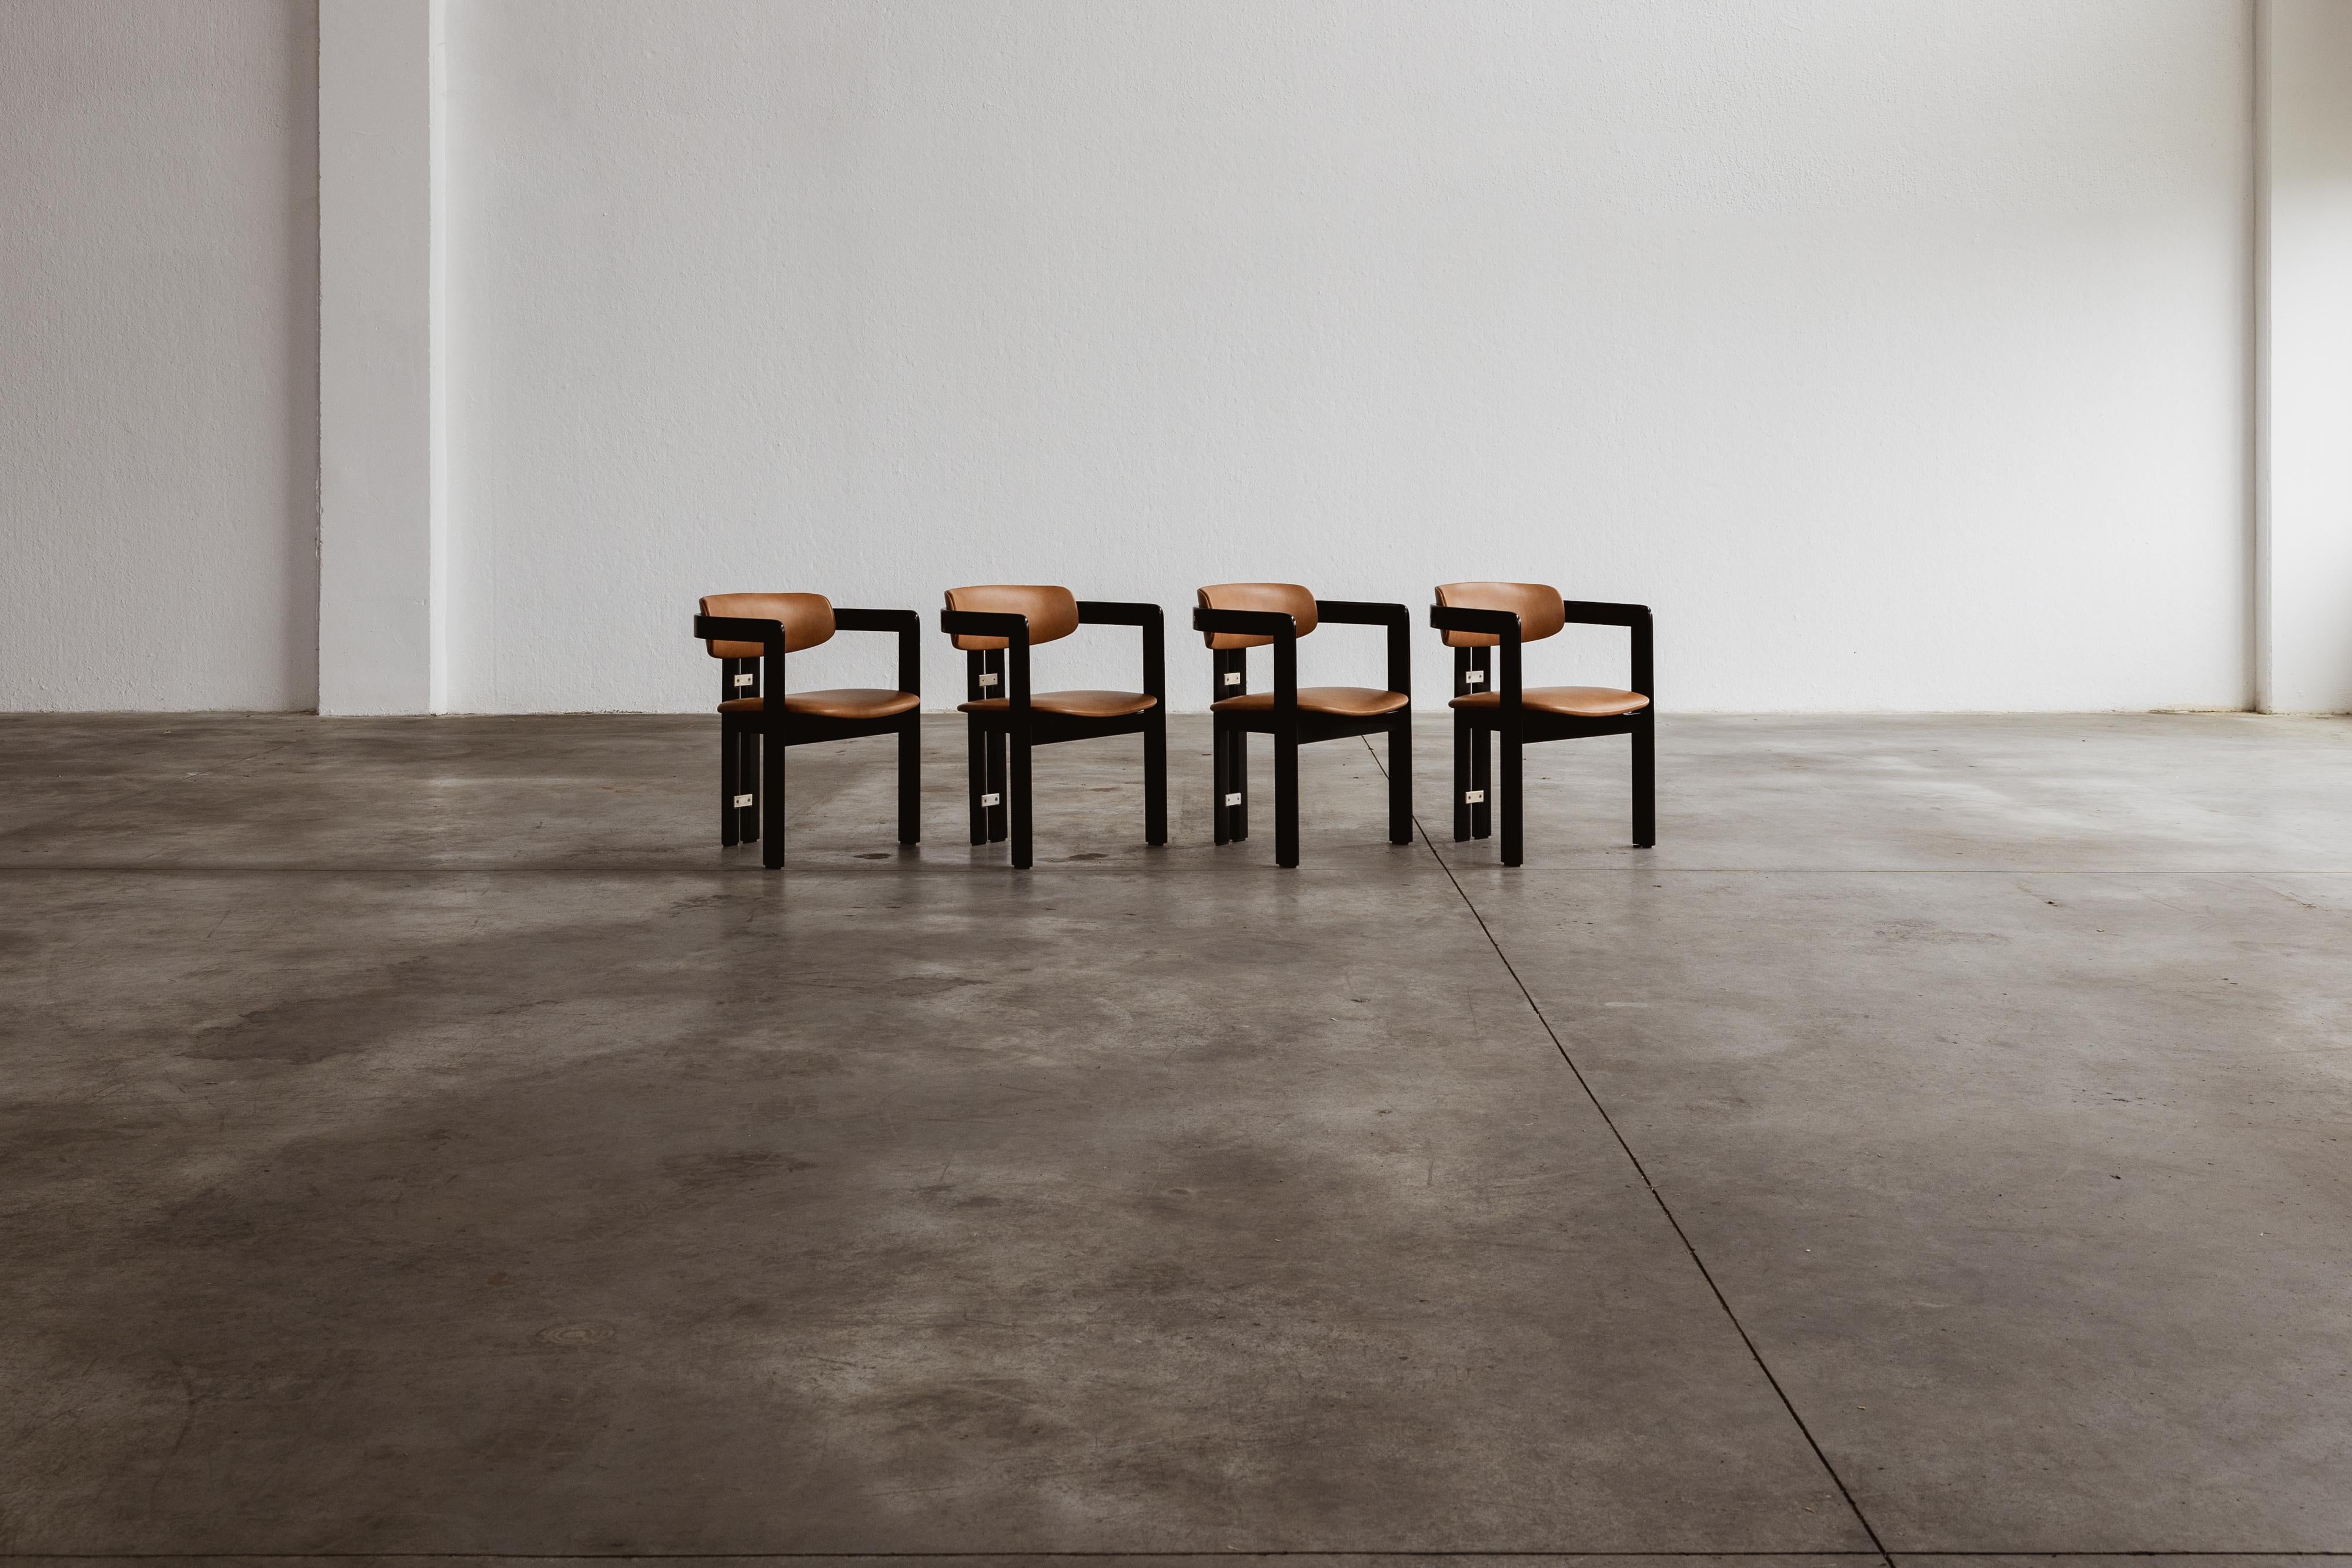 Augusto Savini “Pamplona” dining chairs for Pozzi, black framework and ranch leather, Italy, 1965, set of four.

In the realm of Italian craftsmanship, the Pamplona chairs by Augusto Savini for Pozzi stand as a symbol of architectural elegance.